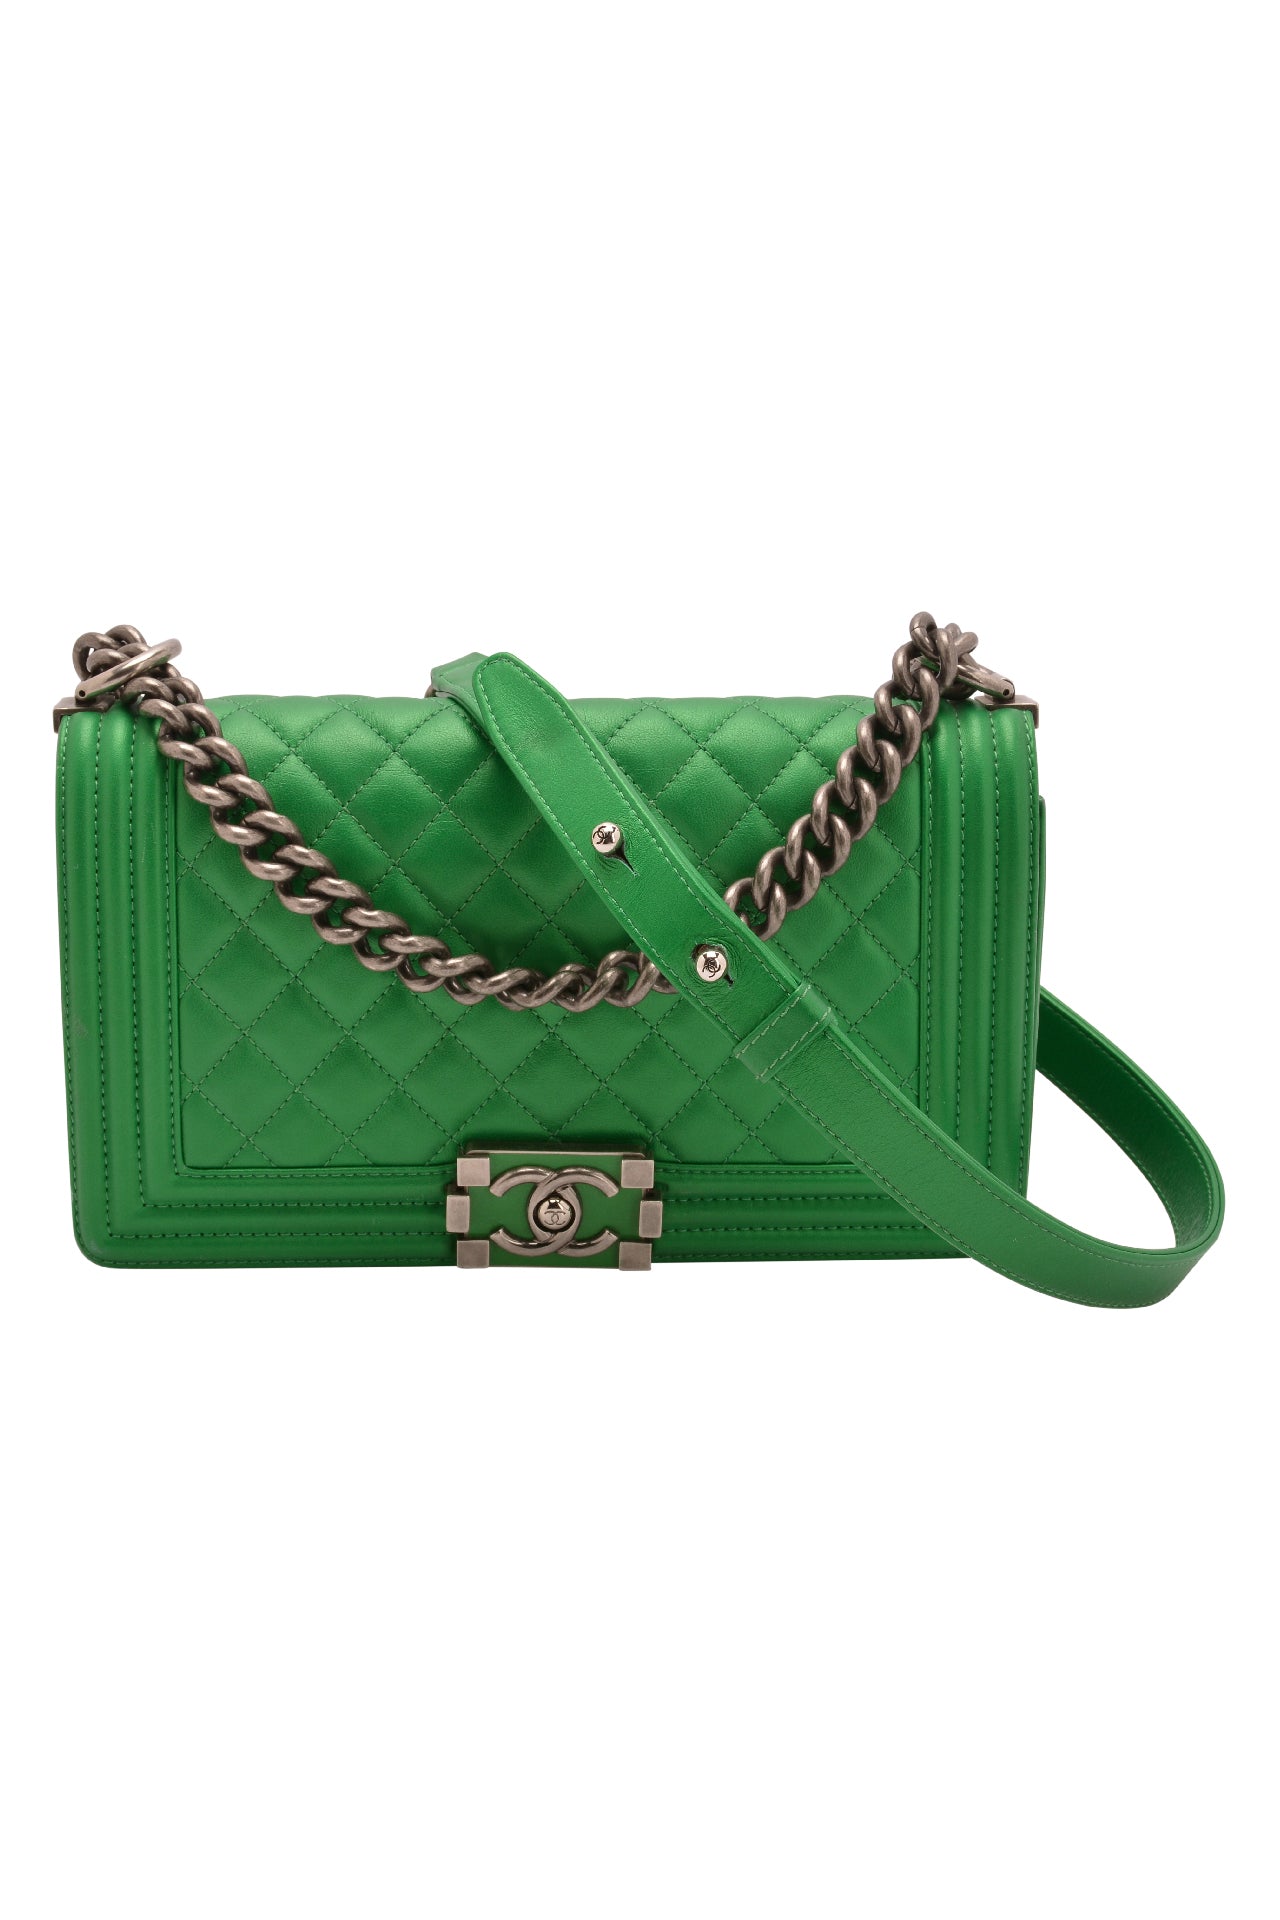 Chanel Boy Flap Bag Quilted Lambskin Old Medium Green 2287385